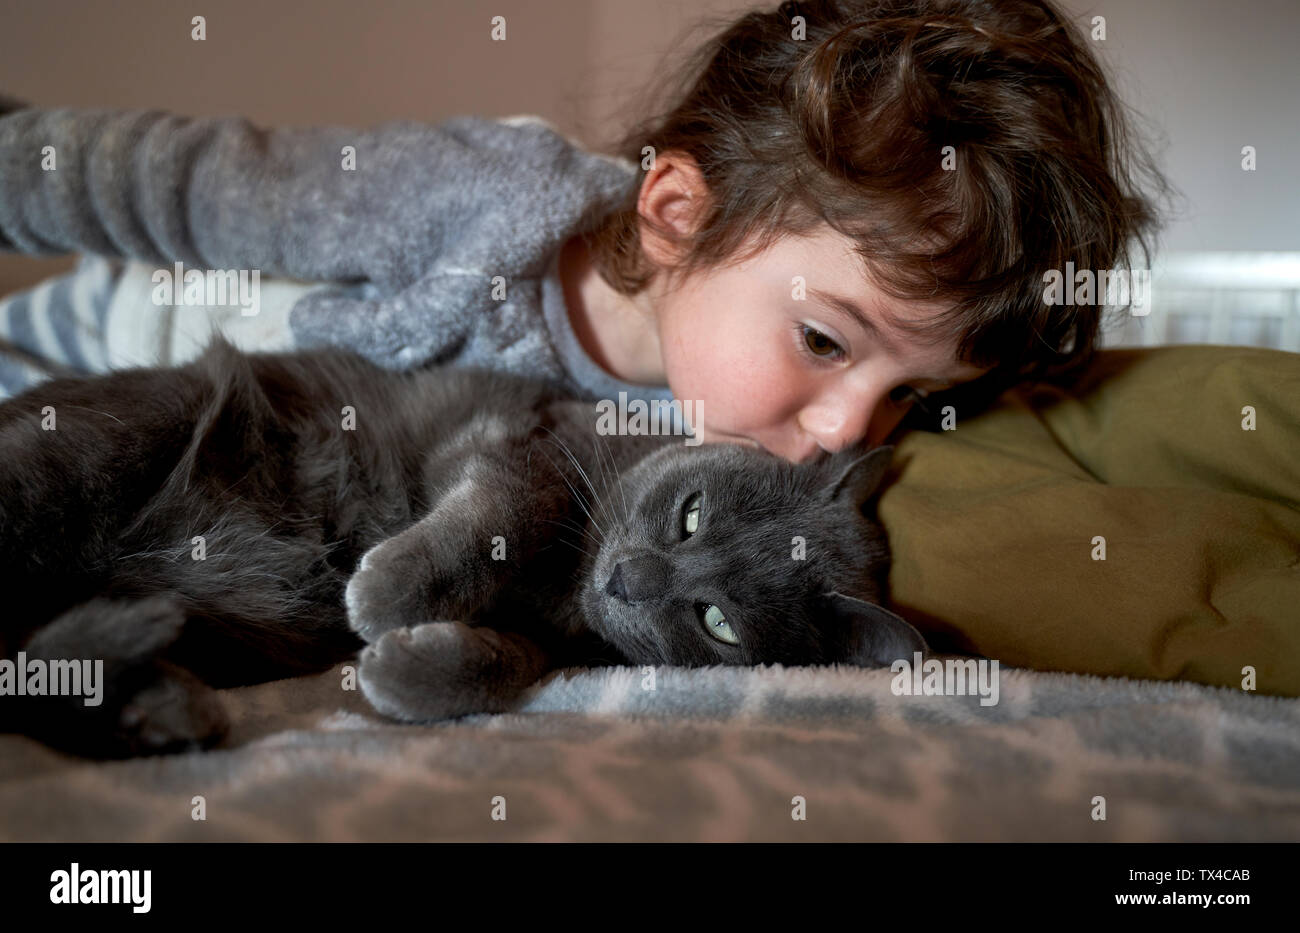 Girl kissing gray cat lying on bed Banque D'Images